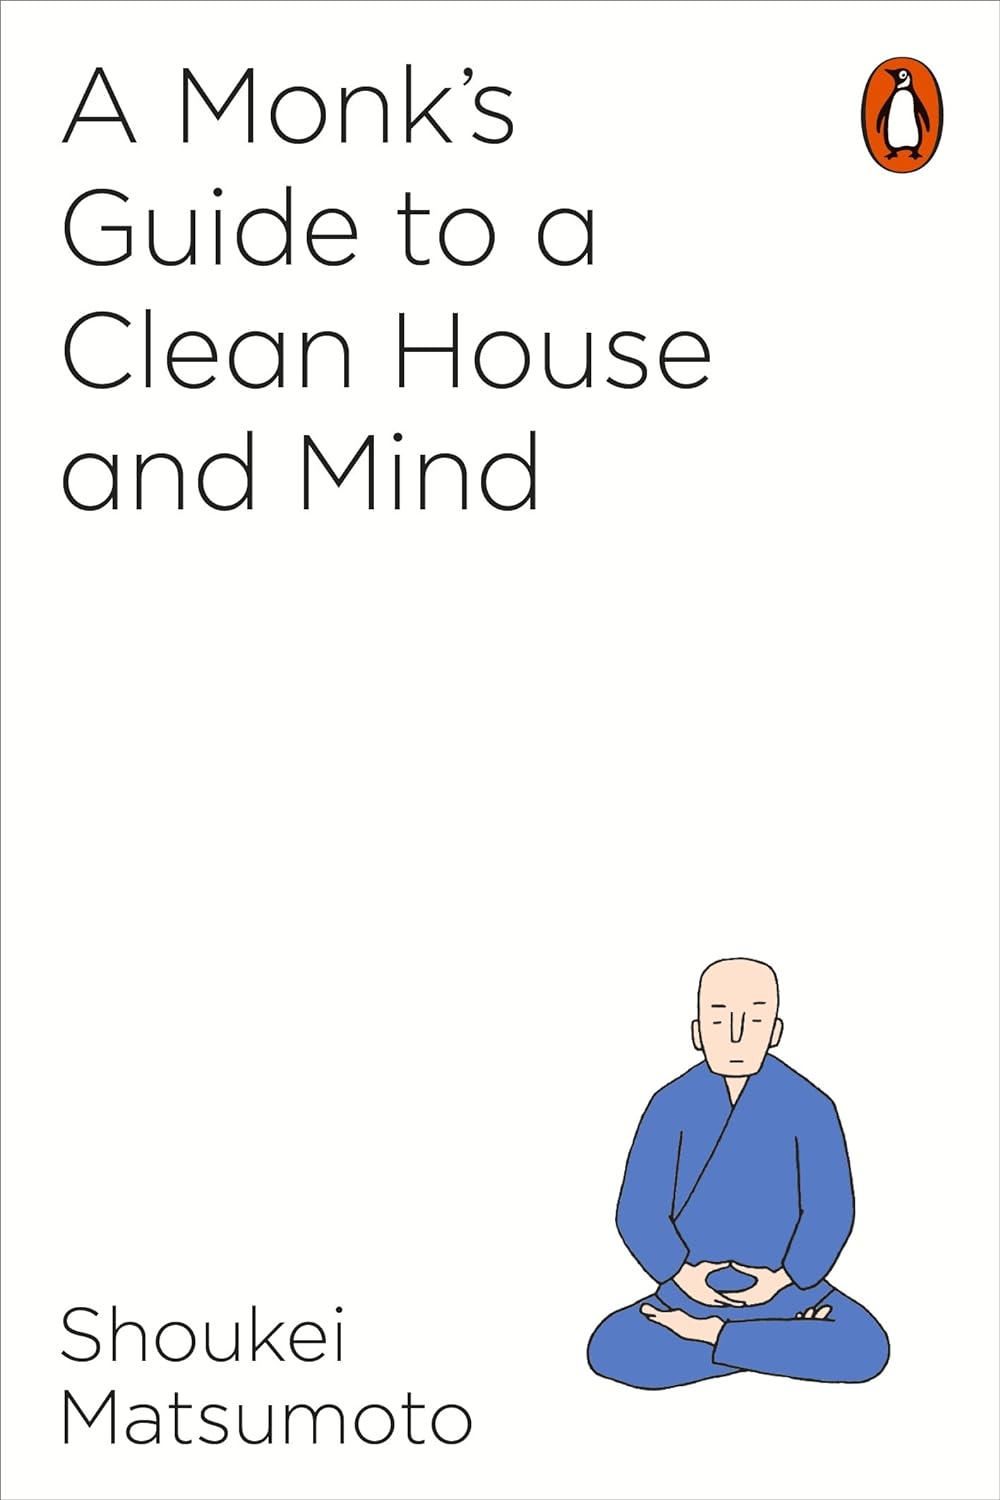 Shoukei Matsumoto: A Monk's Guide to a Clean House and Mind (2018, TarcherPerigee)